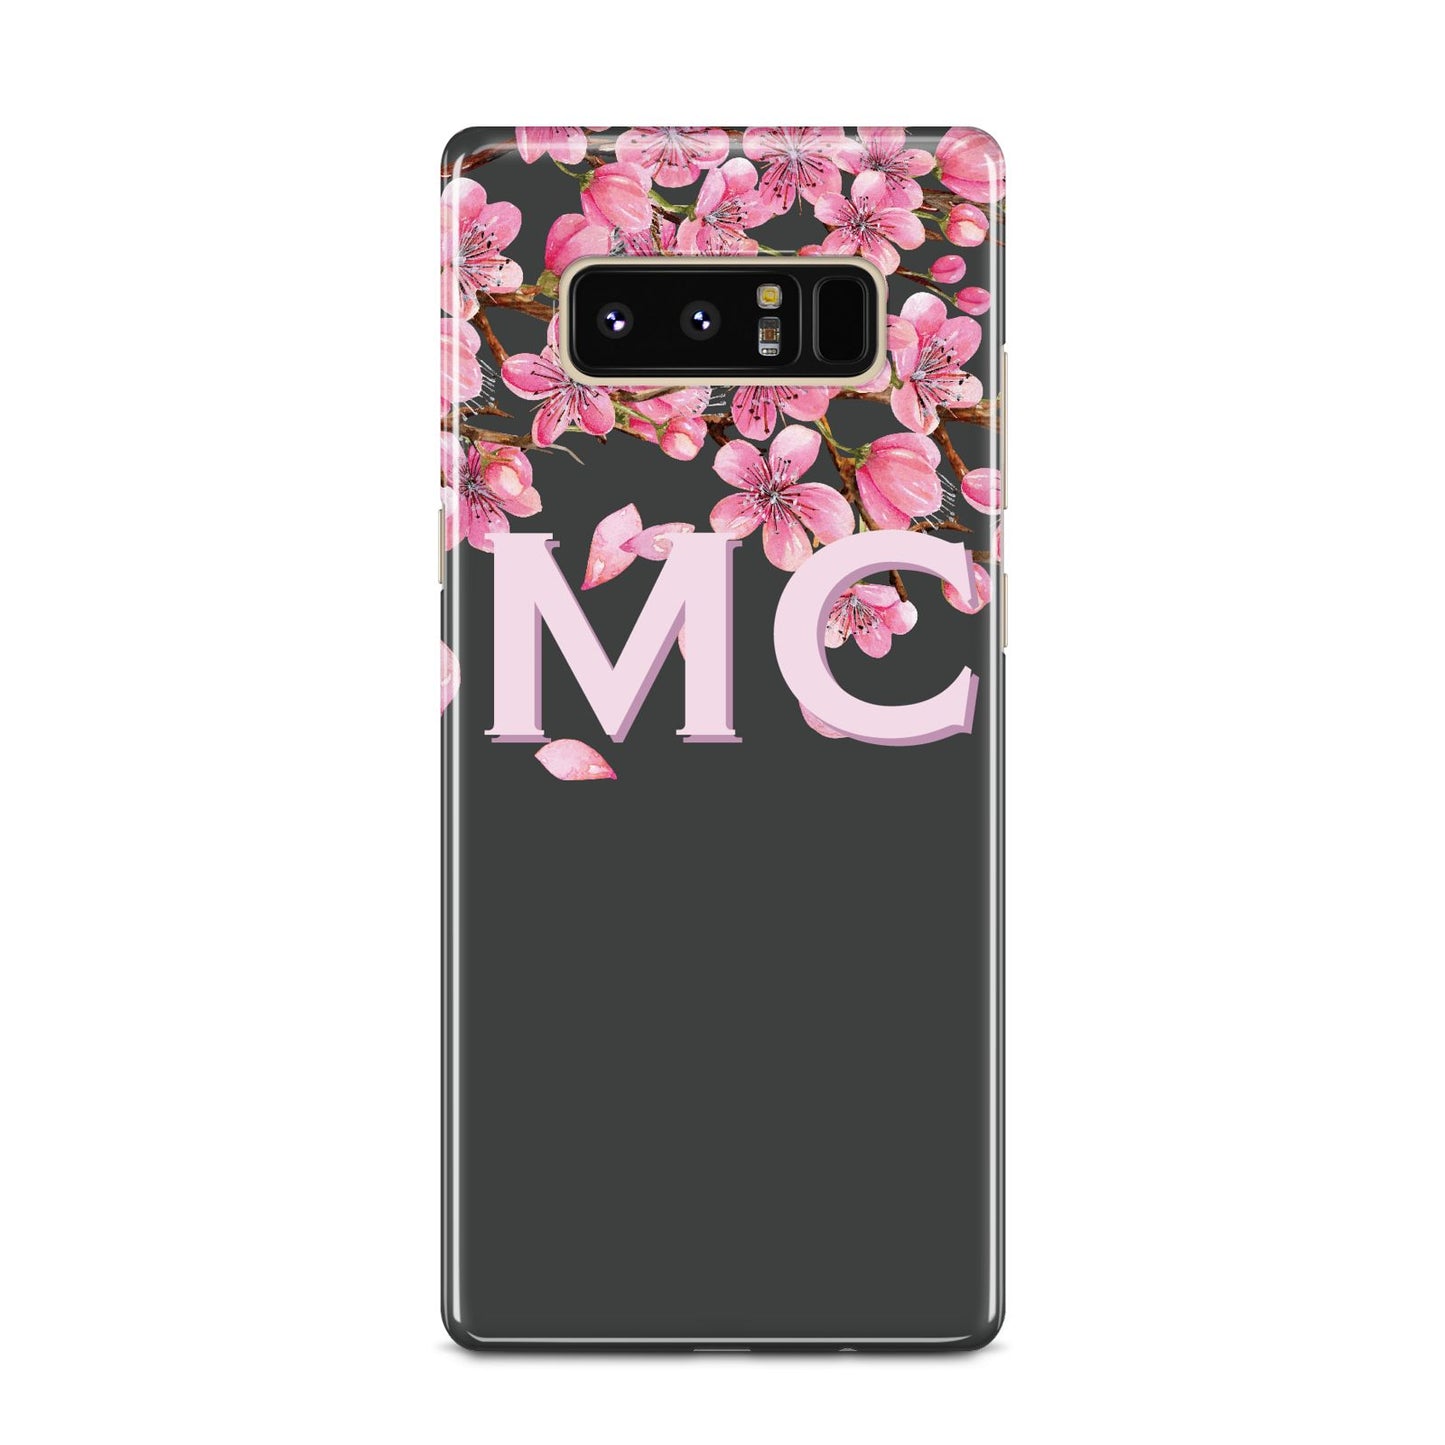 Personalised Floral Blossom Black Pink Samsung Galaxy Note 8 Case